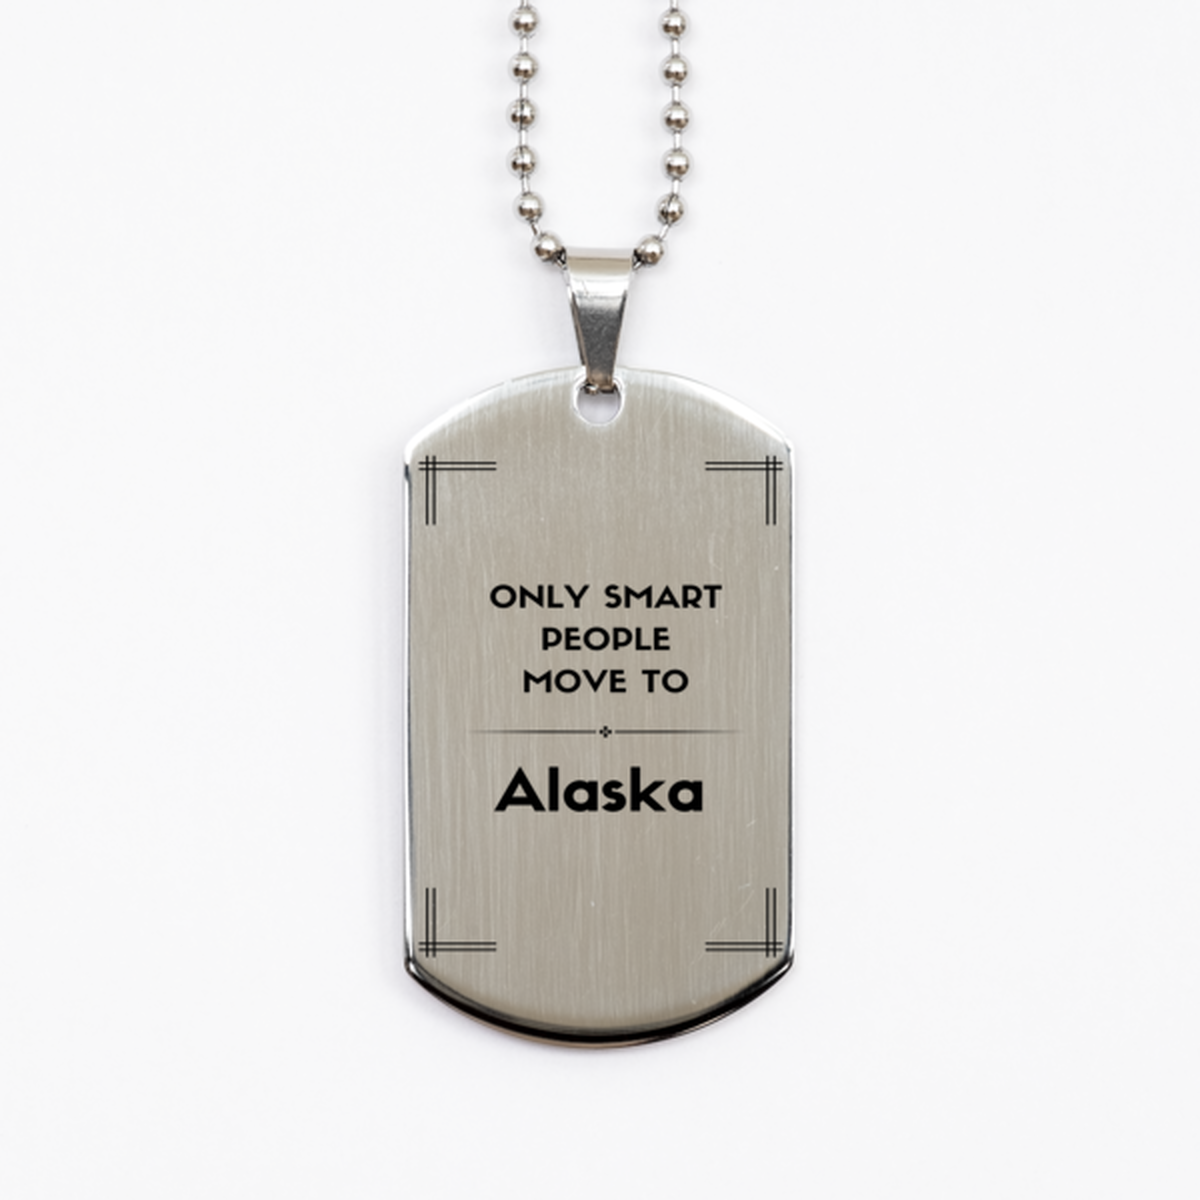 Only smart people move to Alaska Silver Dog Tag, Gag Gifts For Alaska, Move to Alaska Gifts for Friends Coworker Funny Saying Quote